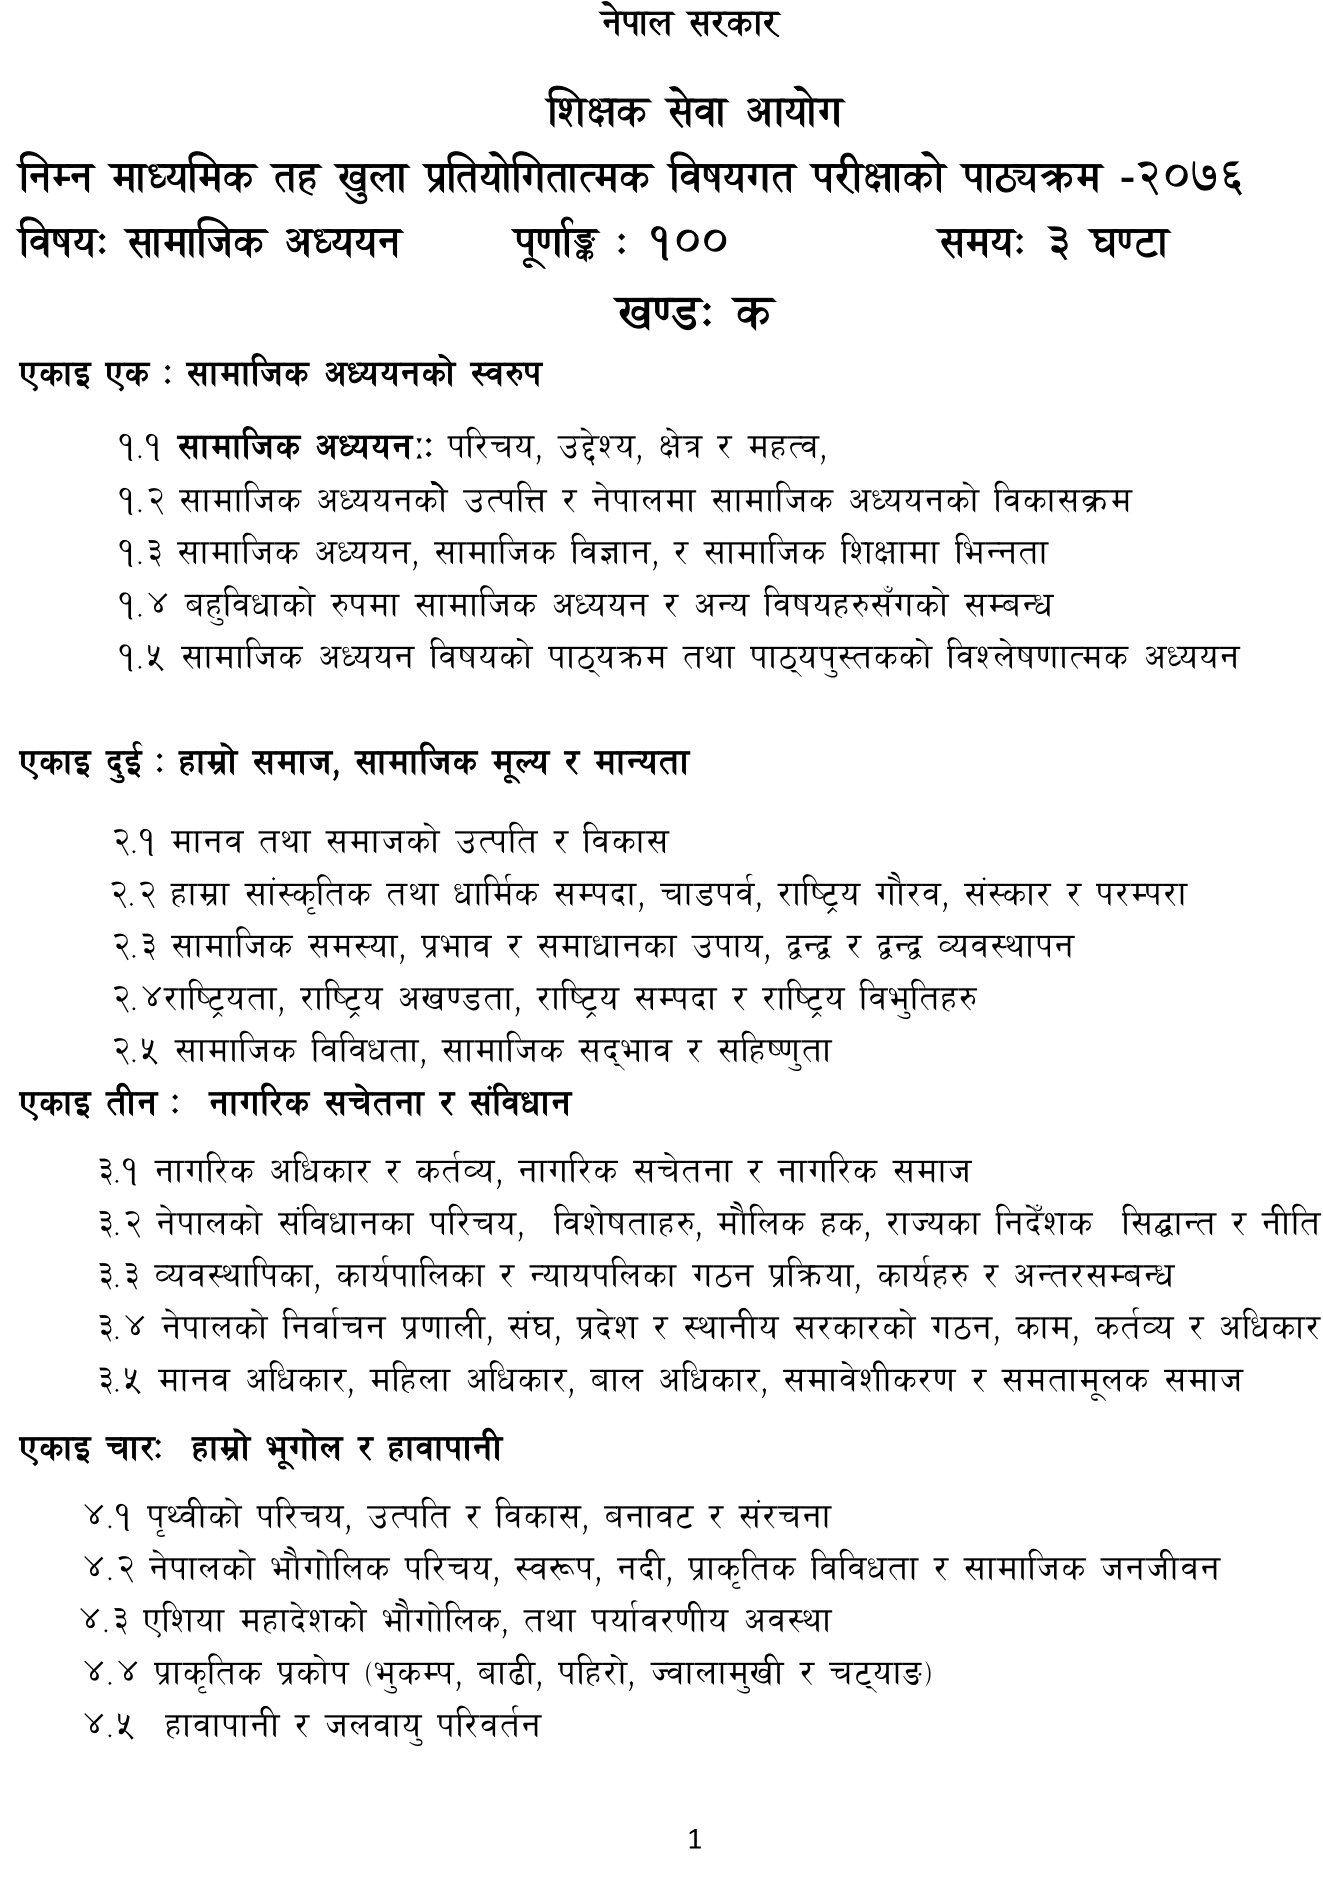 Lower Secondary Level Subject Syllabus of Social Studies Subject